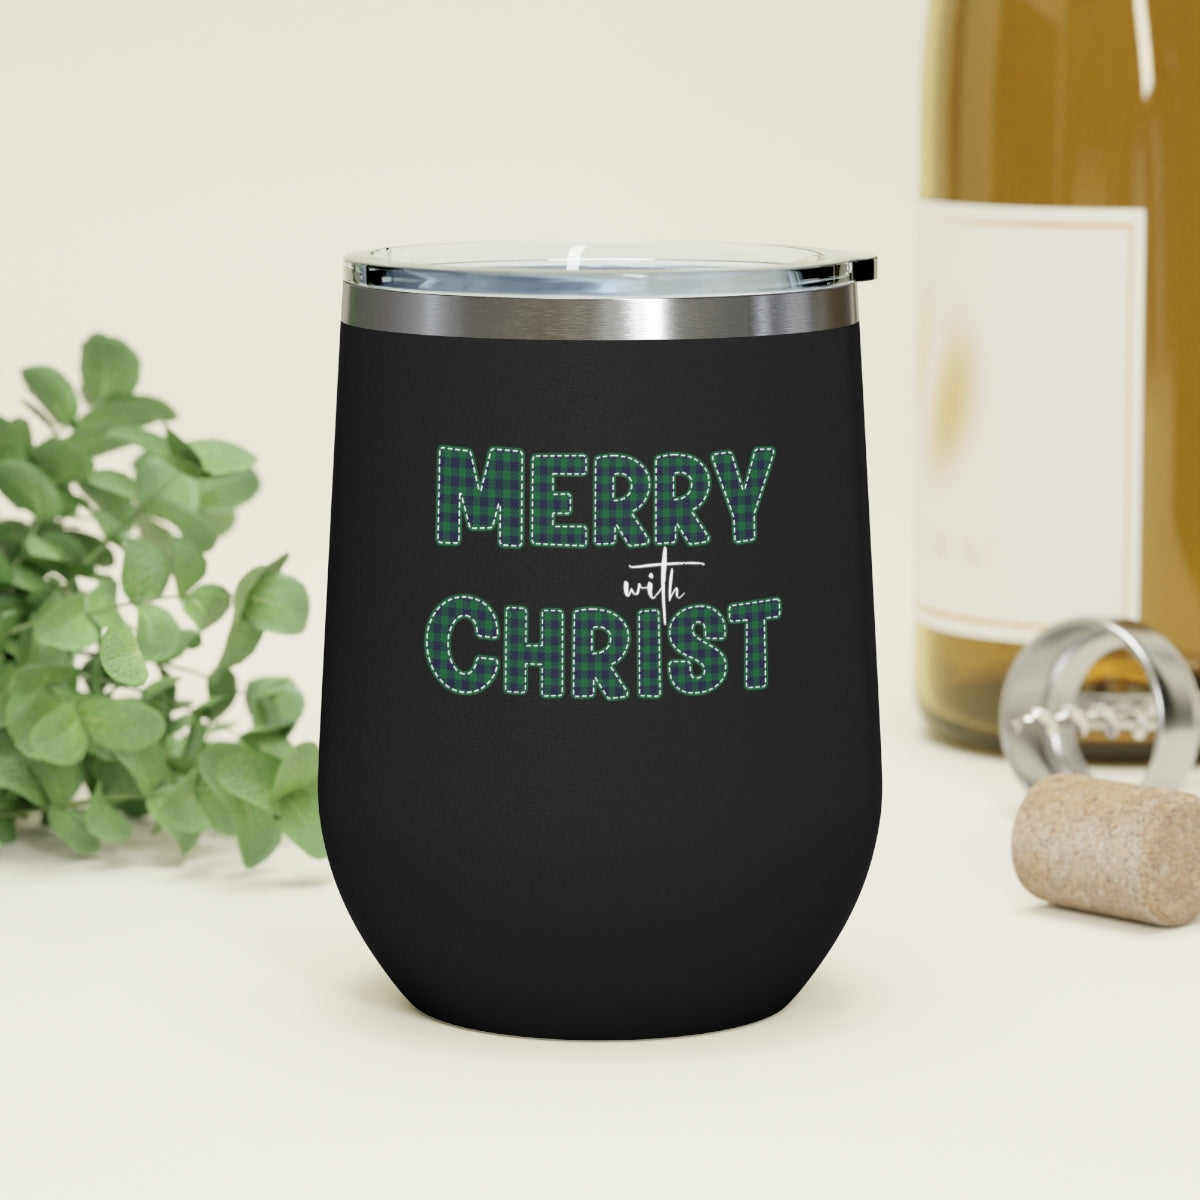 Insulatated Tumbler - 12oz, Merry With Christ, Green Plaid Christmas